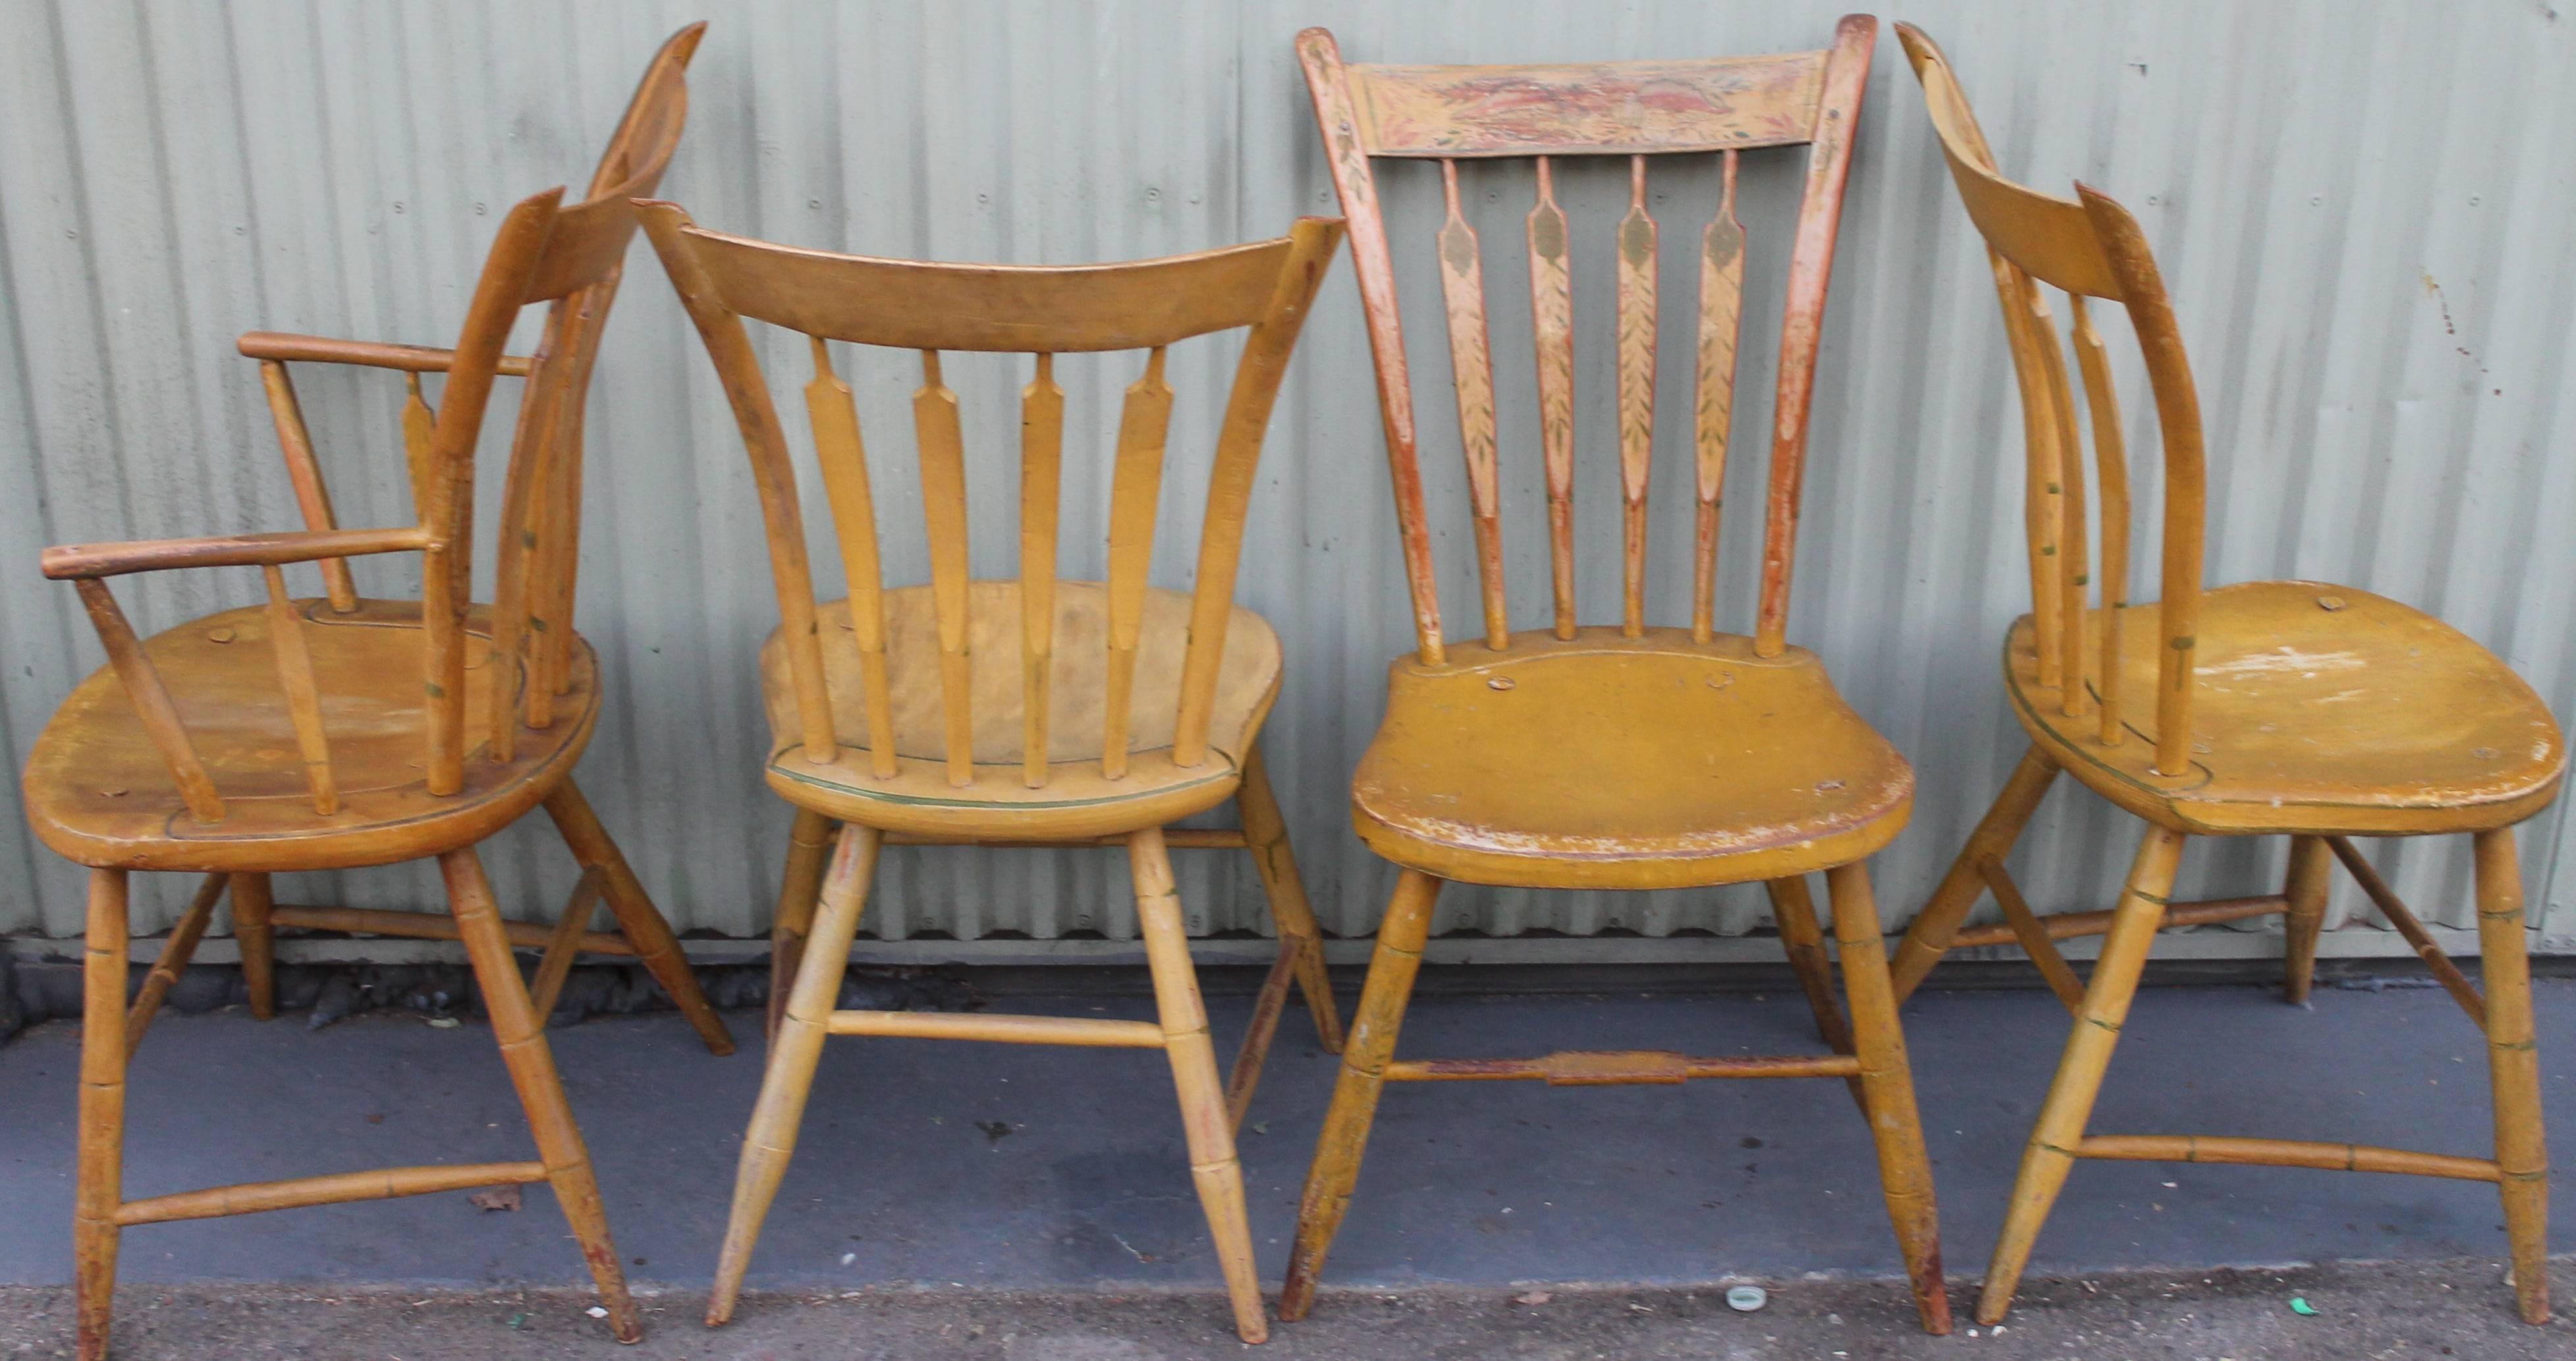 This is a most unusual set of four 19th century New England decorated thumb back Windsor chairs with saddle seats. There is one fantastic arm chair and three matching dinning plank bottom chairs. These fancy paint decorated chairs have shells